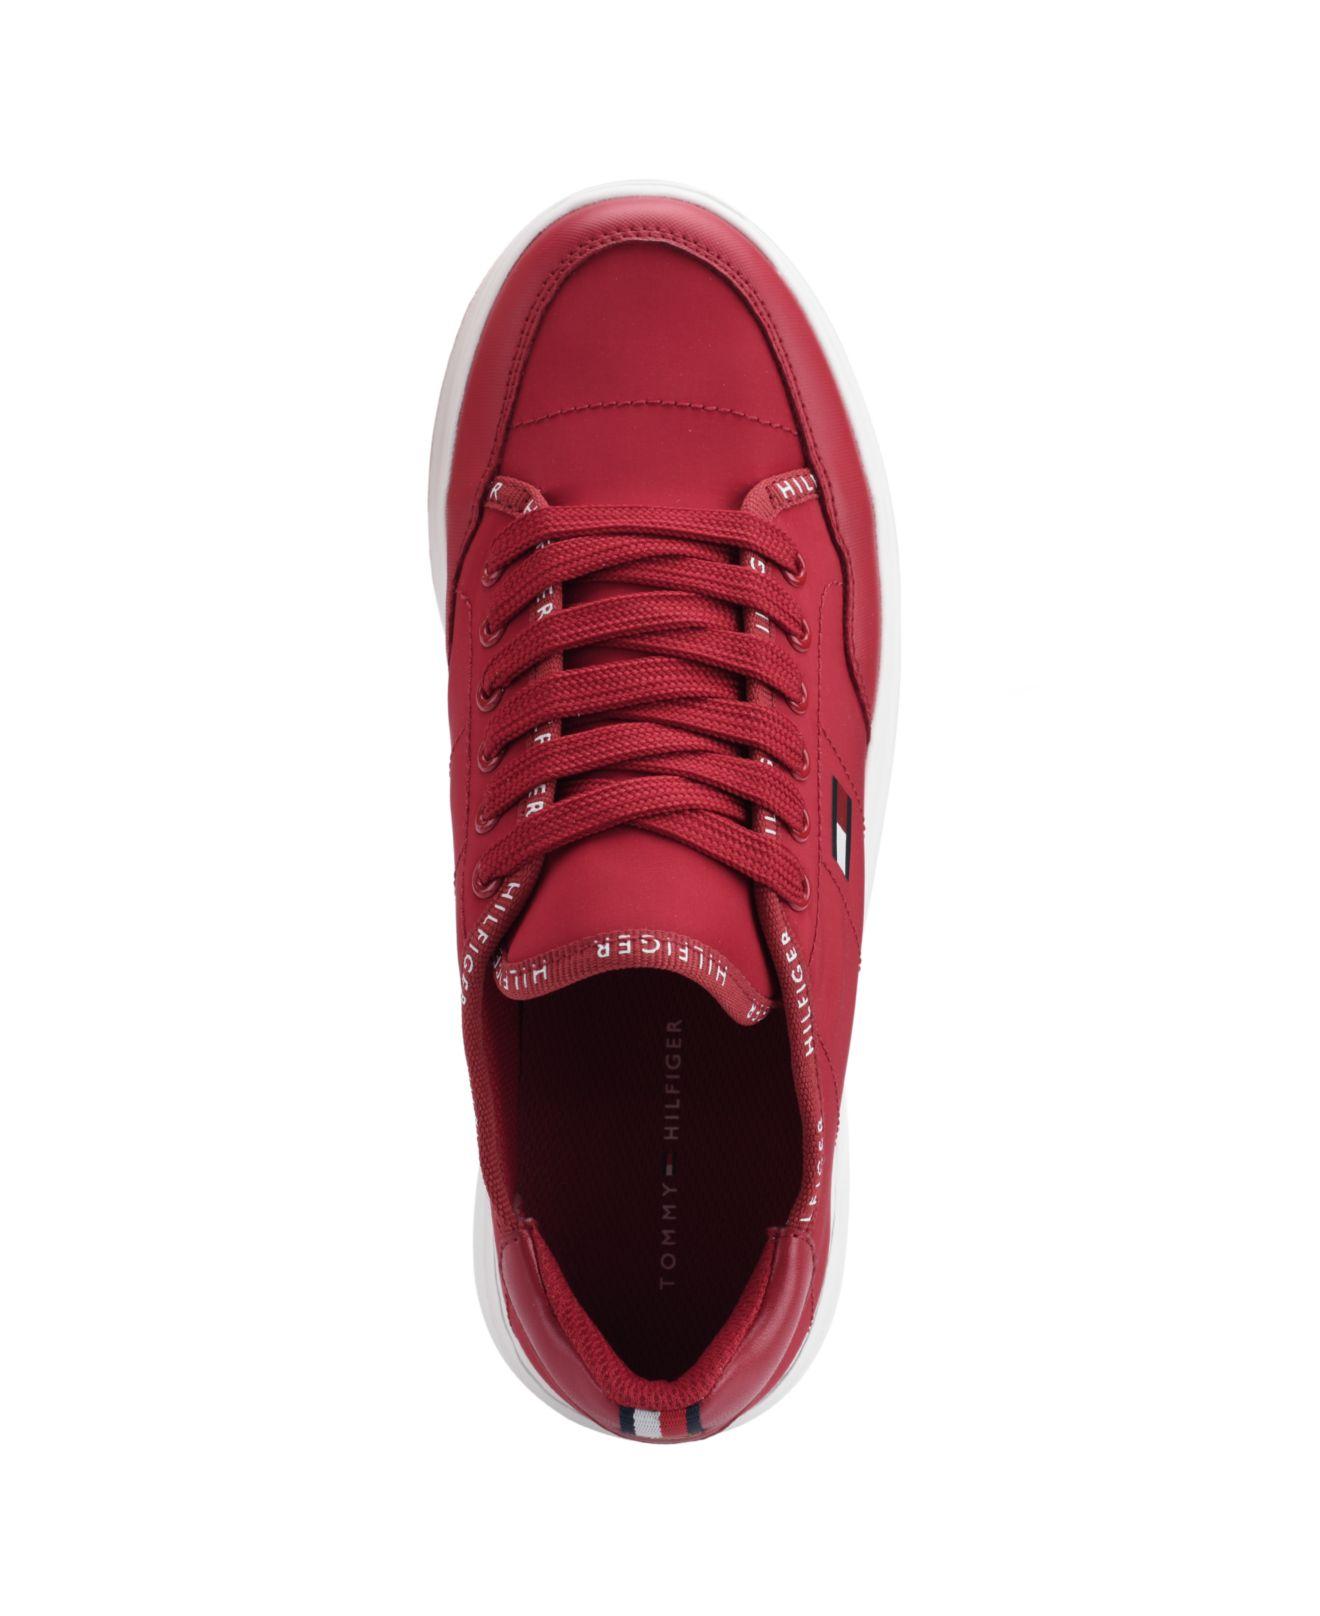 Tommy Hilfiger Grazie Lace-up Fashion Sneakers in Red | Lyst